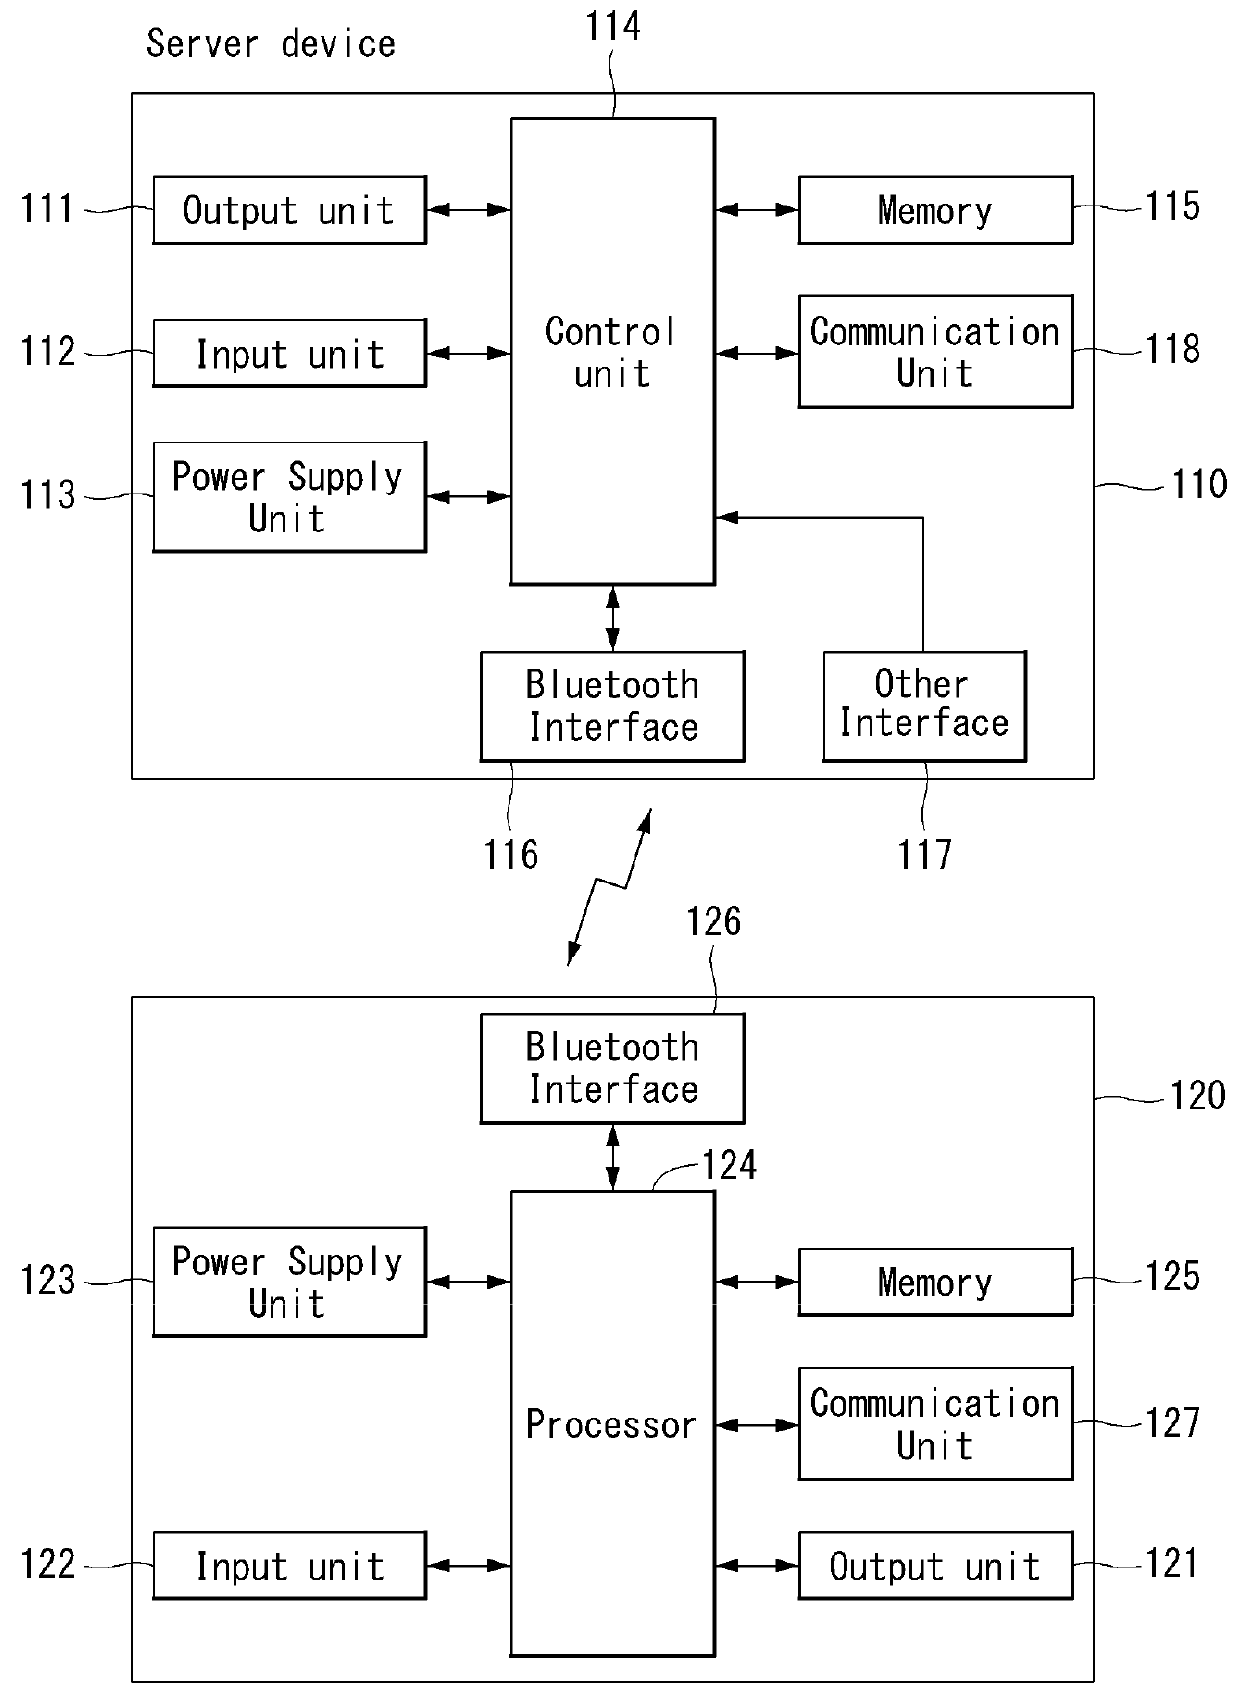 Method and apparatus for connecting devices using bluetooth low-energy technology